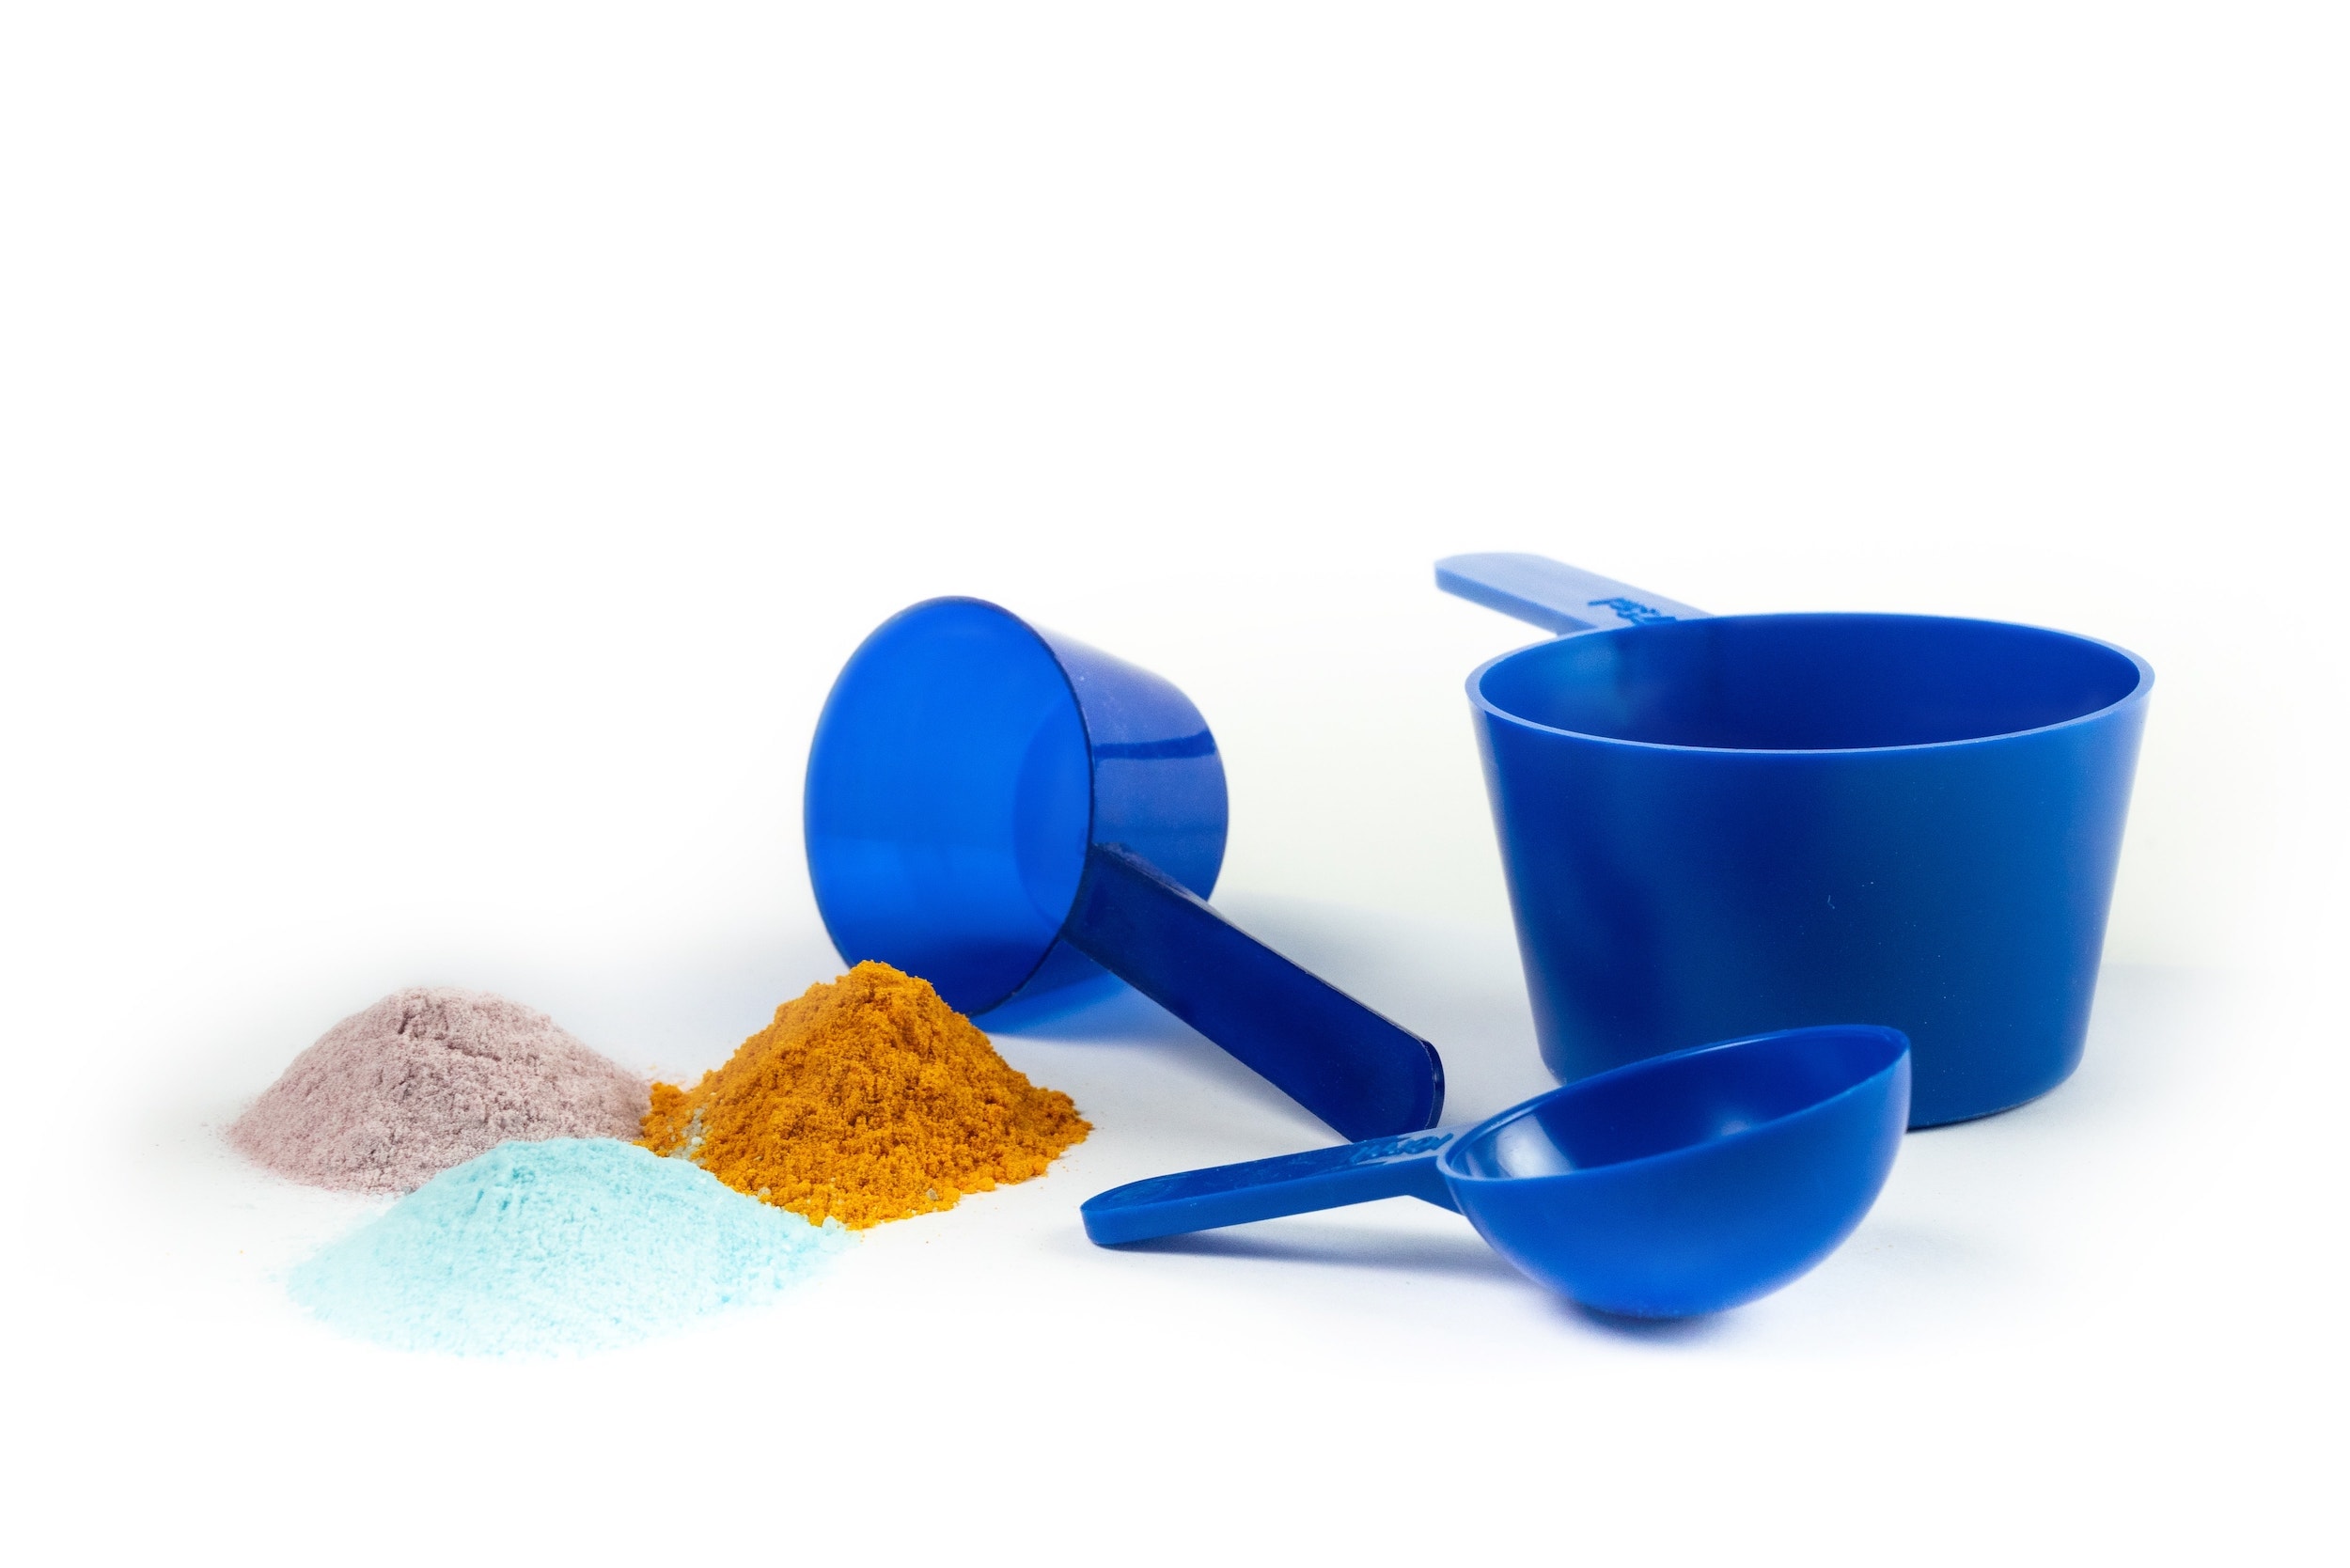  Bulk powders for supplement manufacturing